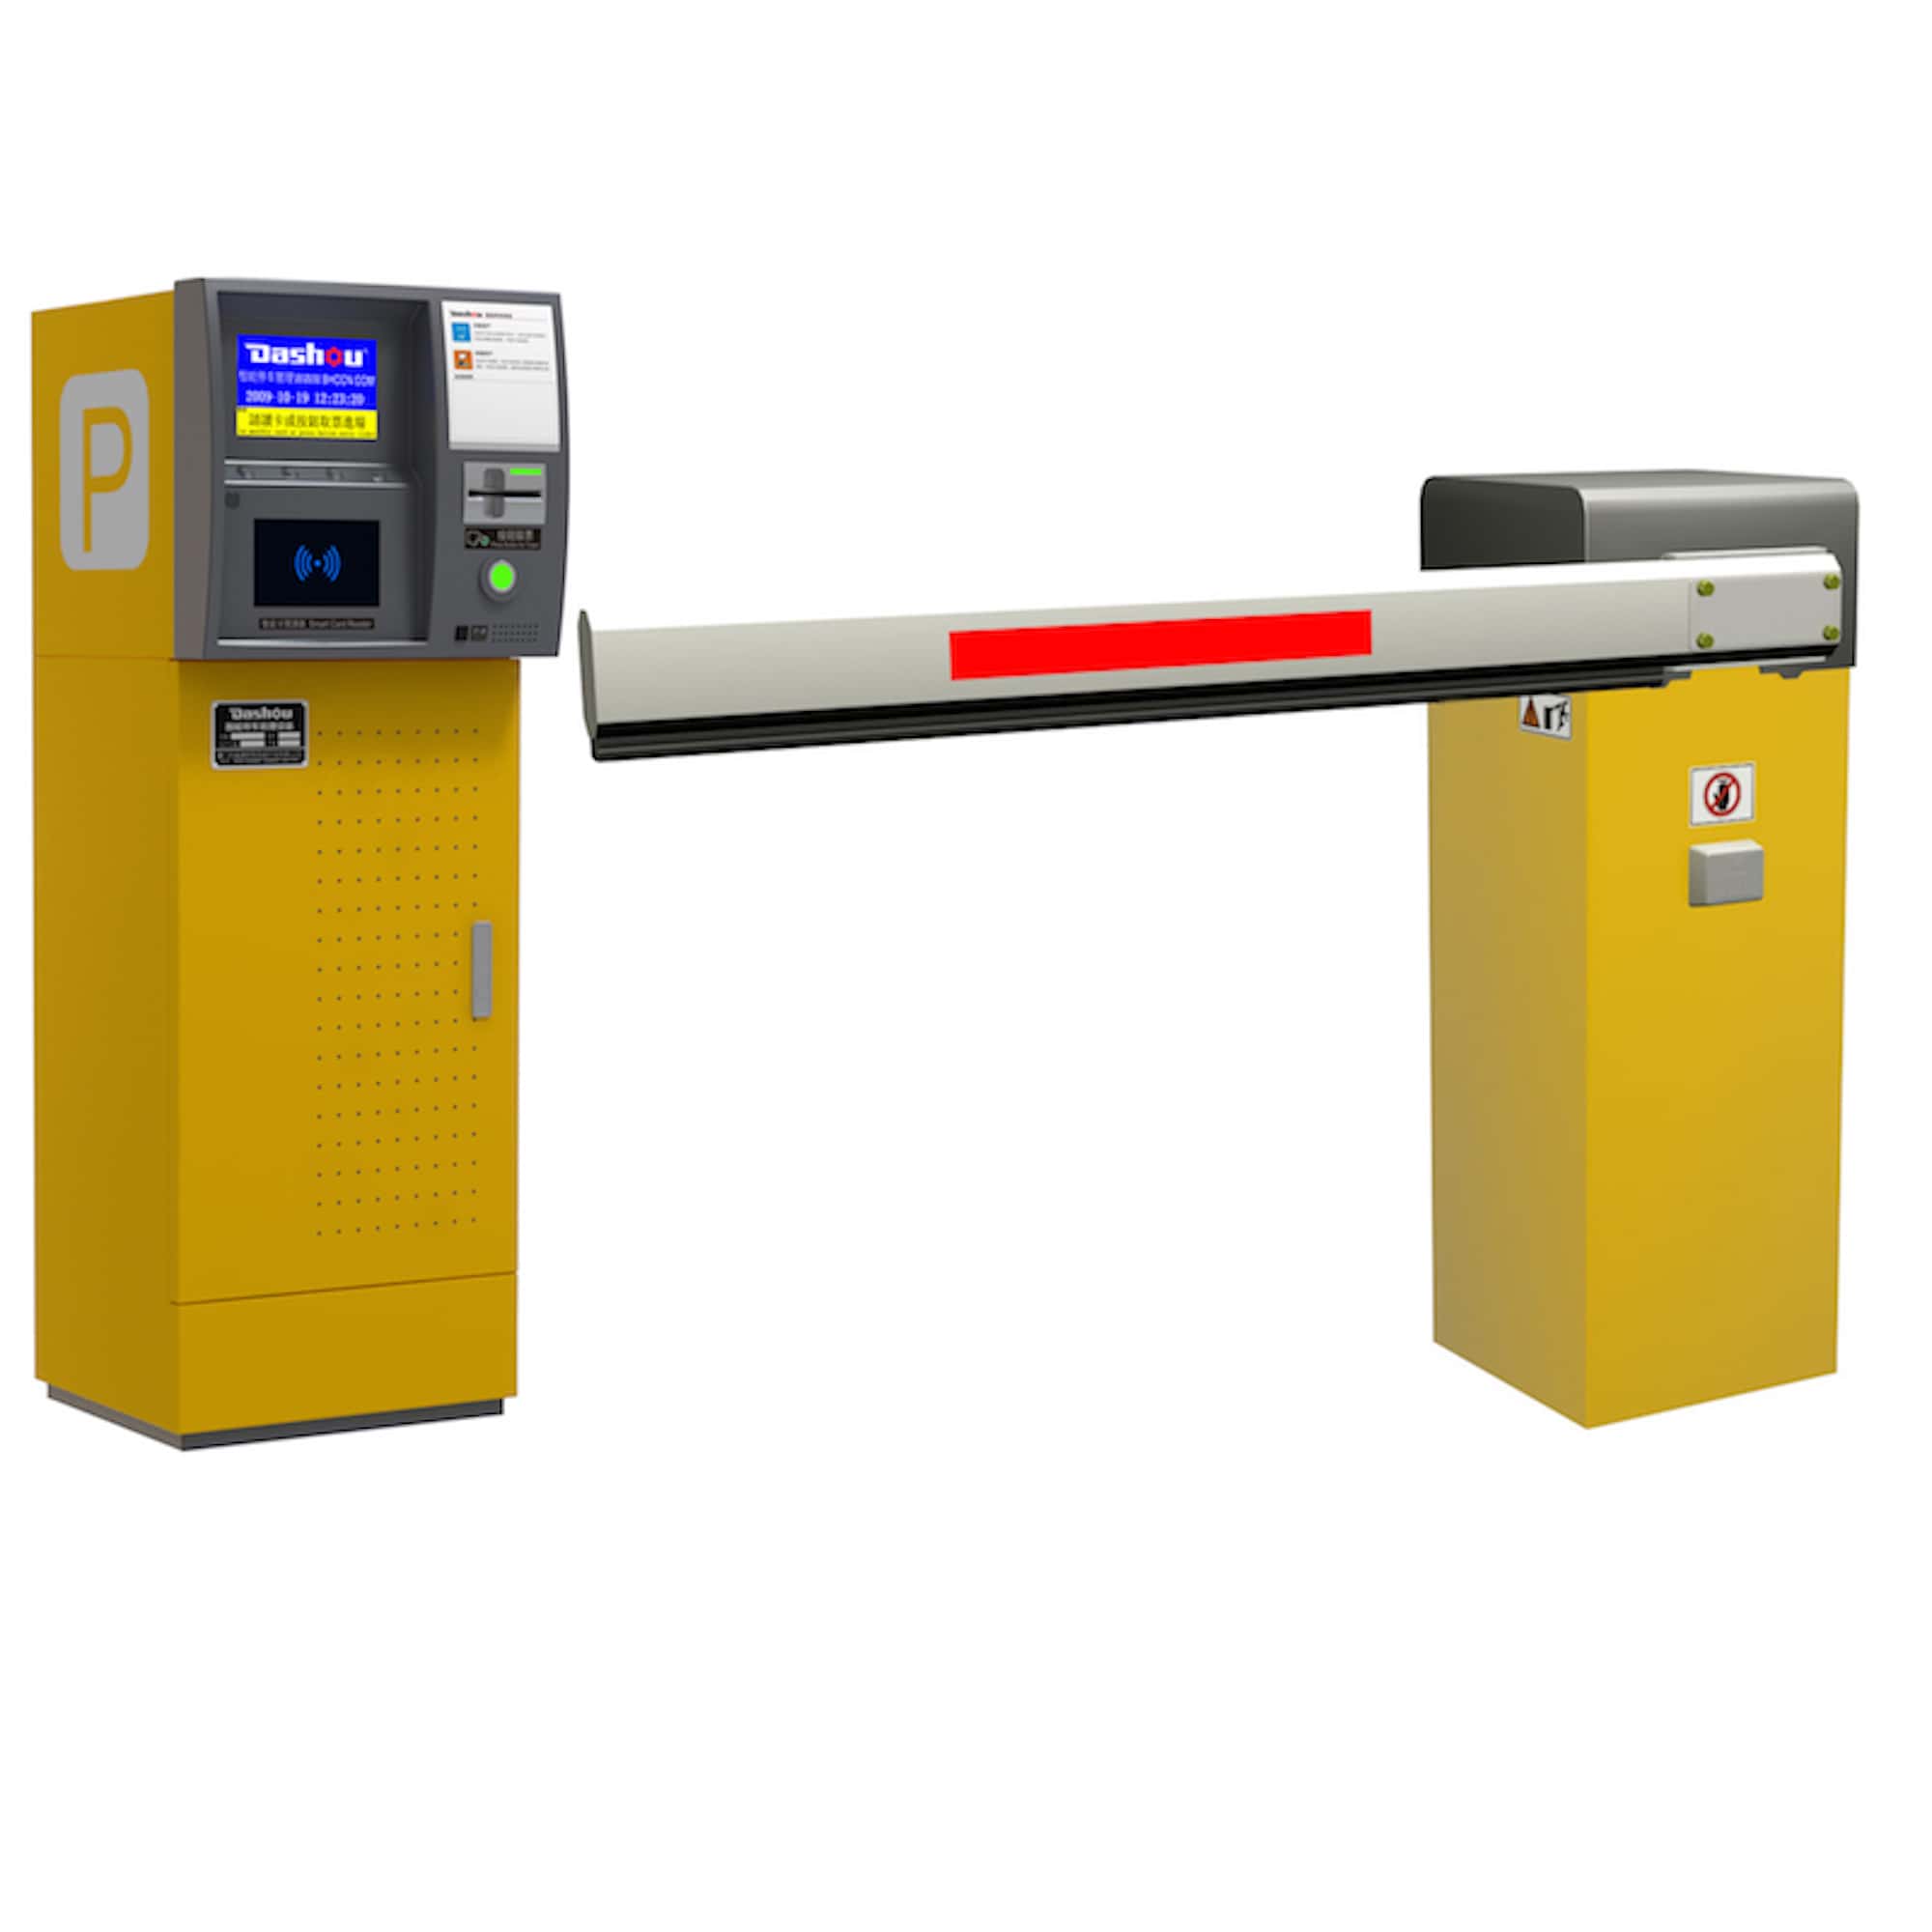 V32-910F Pay At Exit Ticket Dispensing Parking System